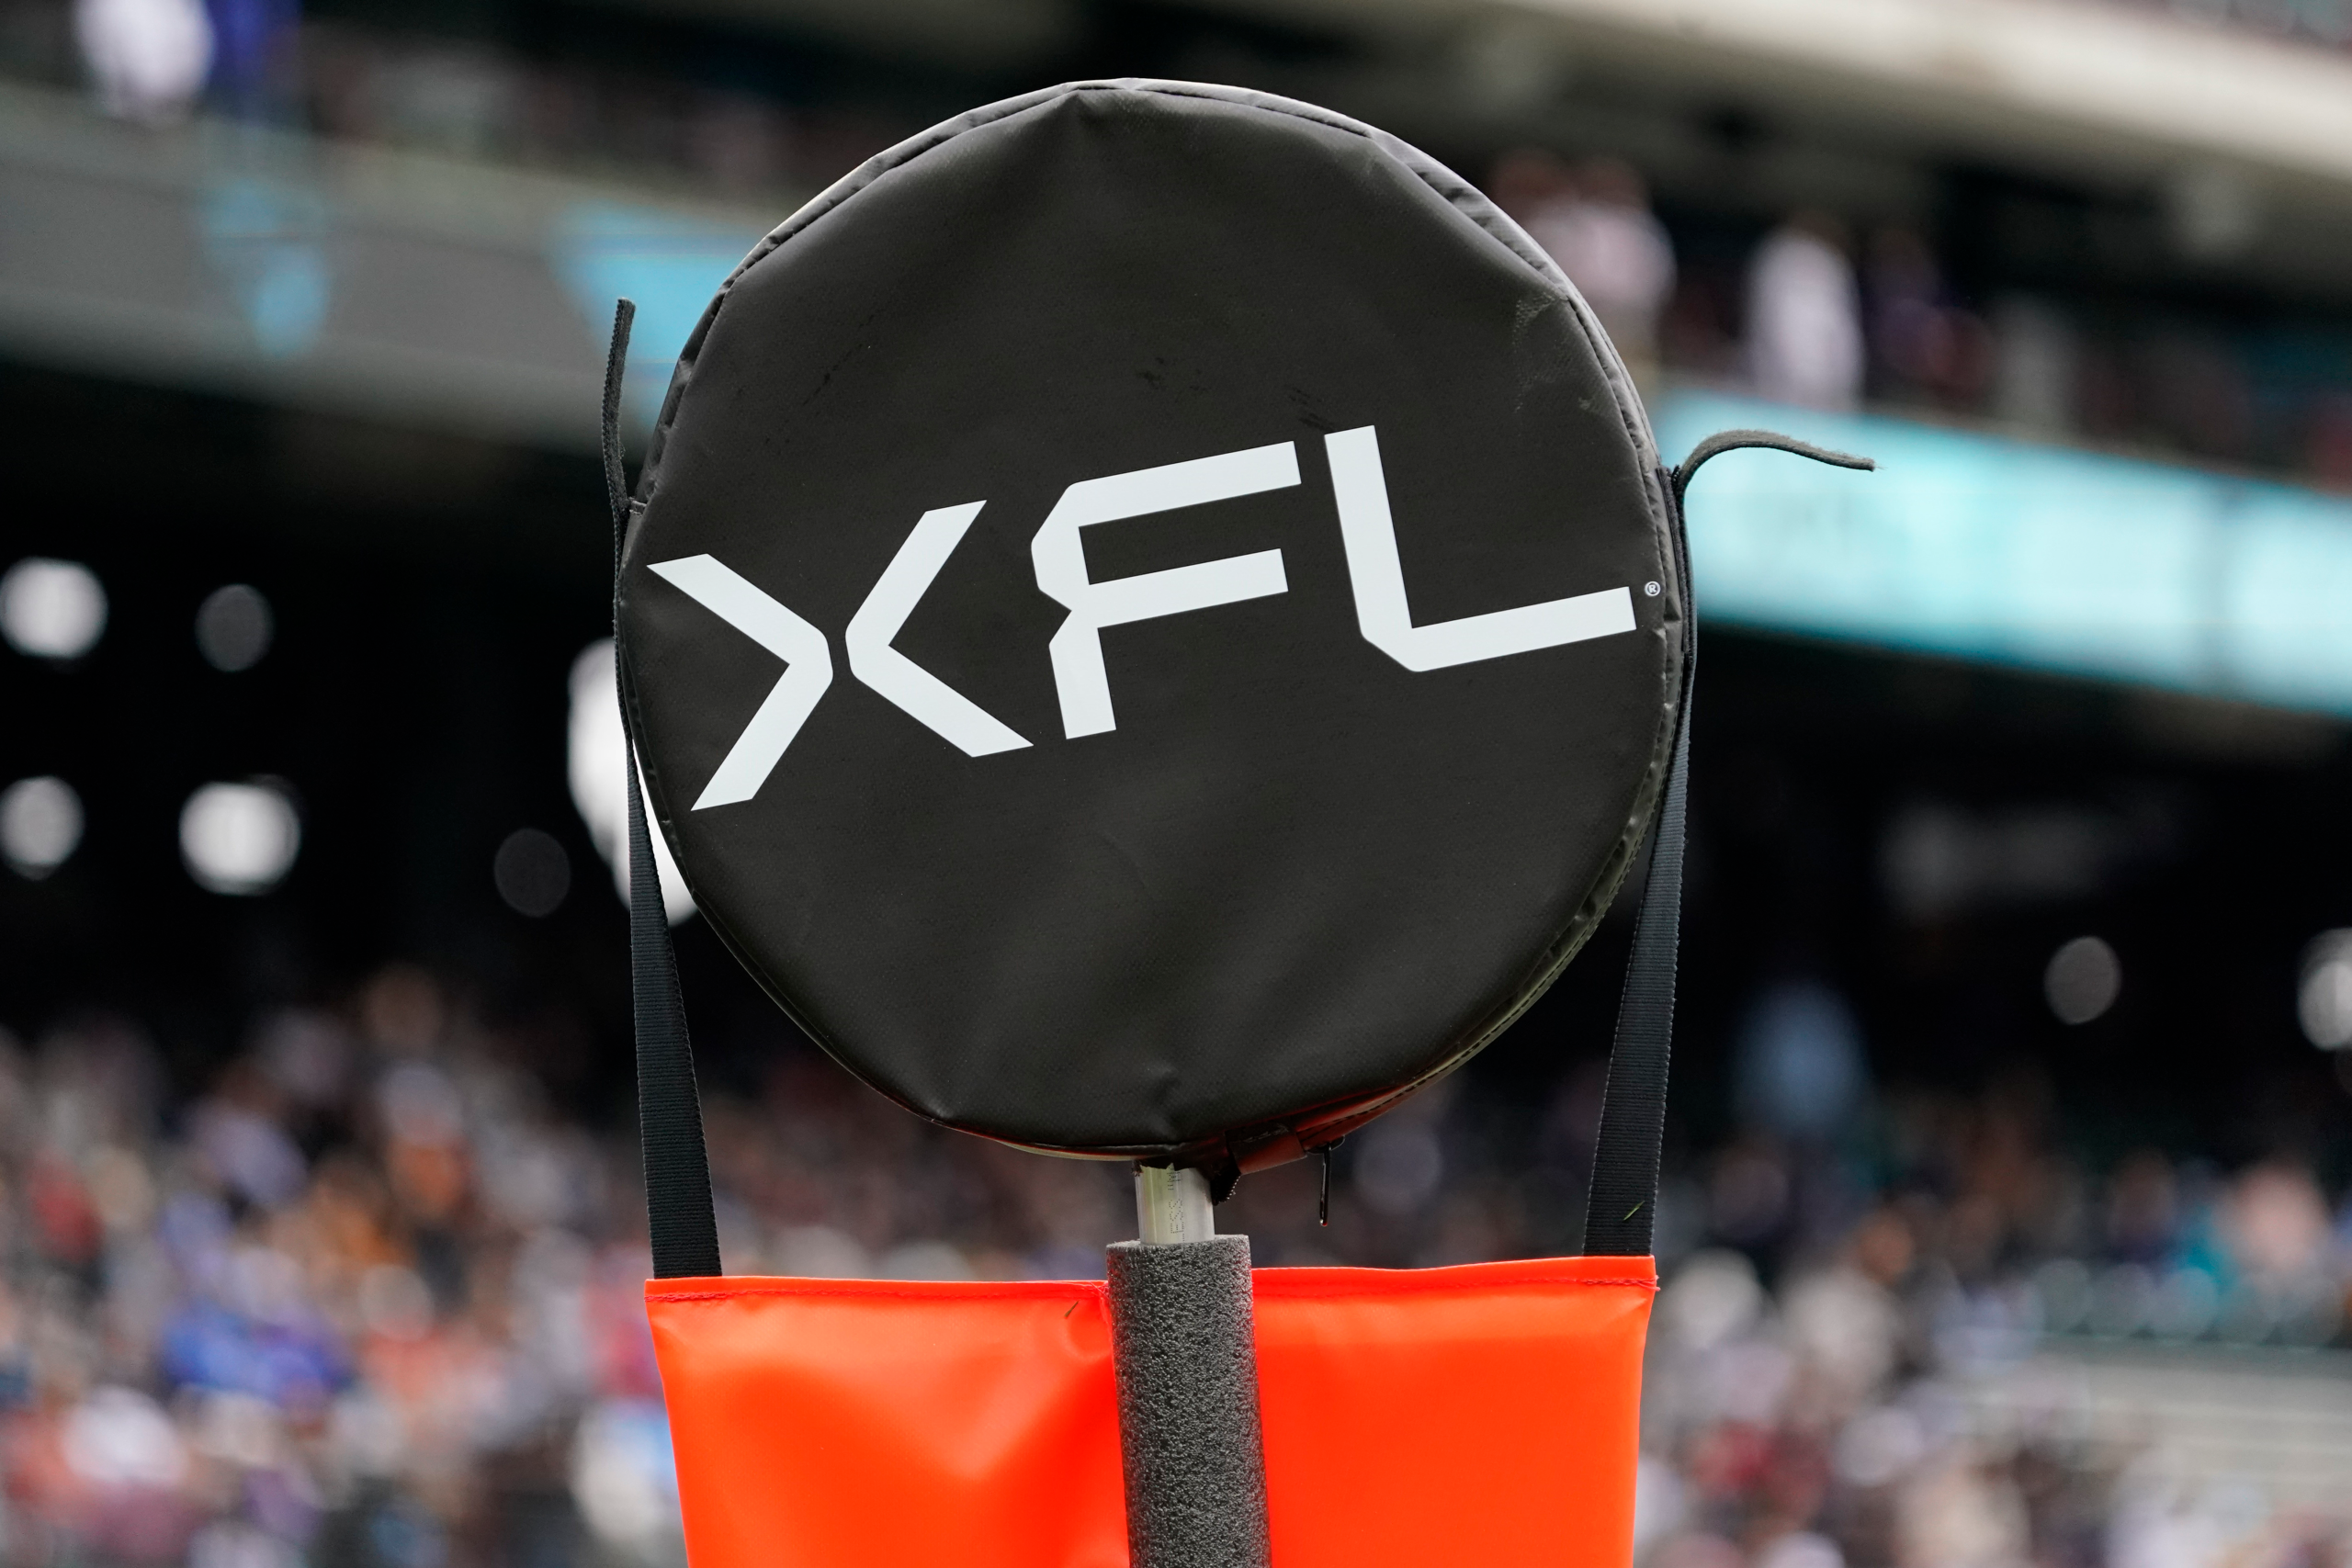 Seattle Sea Dragons Schedule - XFL News and Discussion